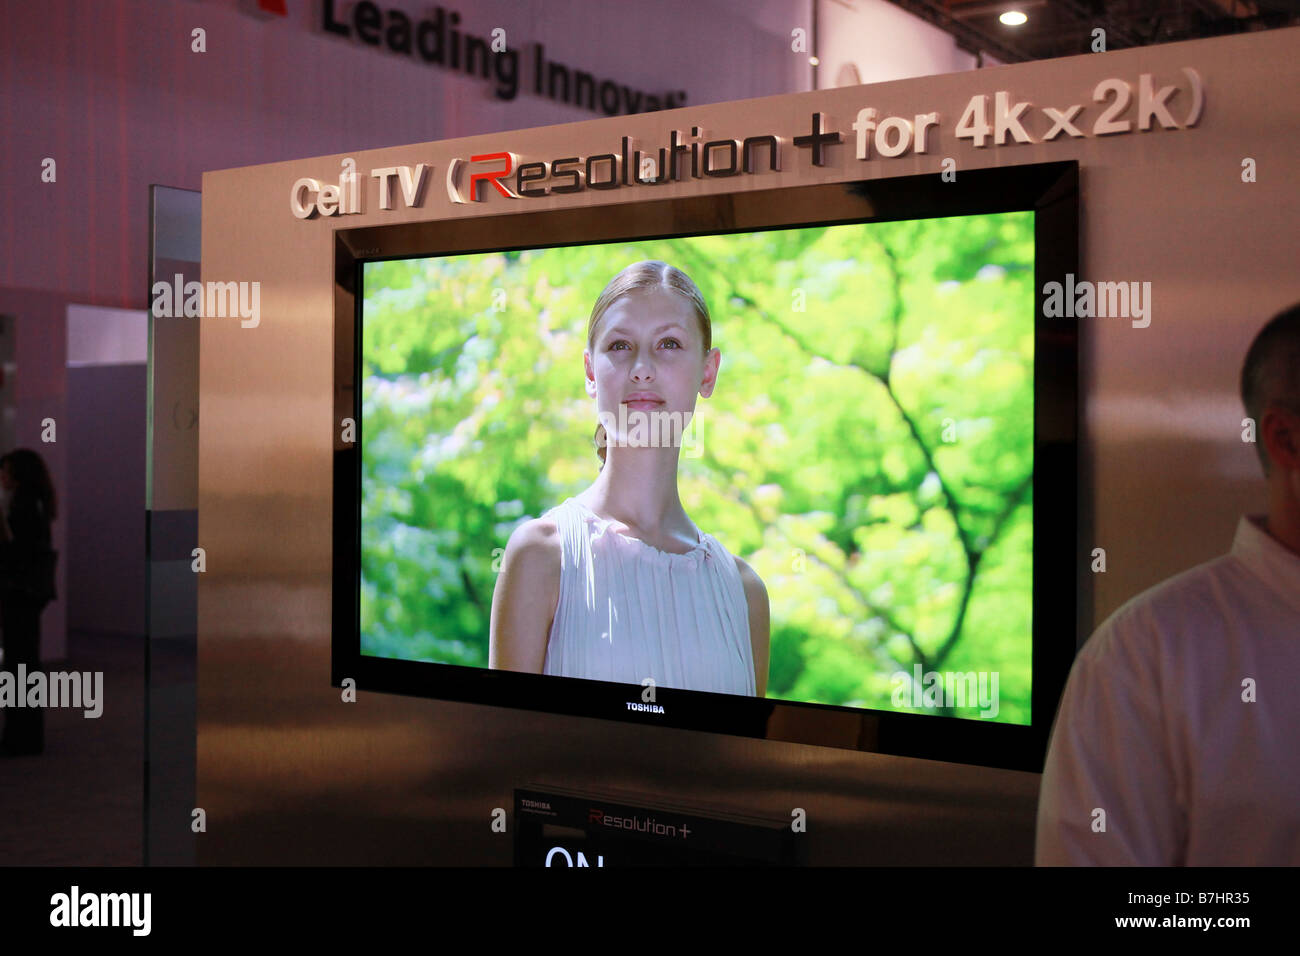 Jan 9, 2009 - Las Vegas, Nevada, USA - Toshiba Corp. debuts concept Resolution+ for 4K x 2K Cell TV monitor at CES trade show. Stock Photo